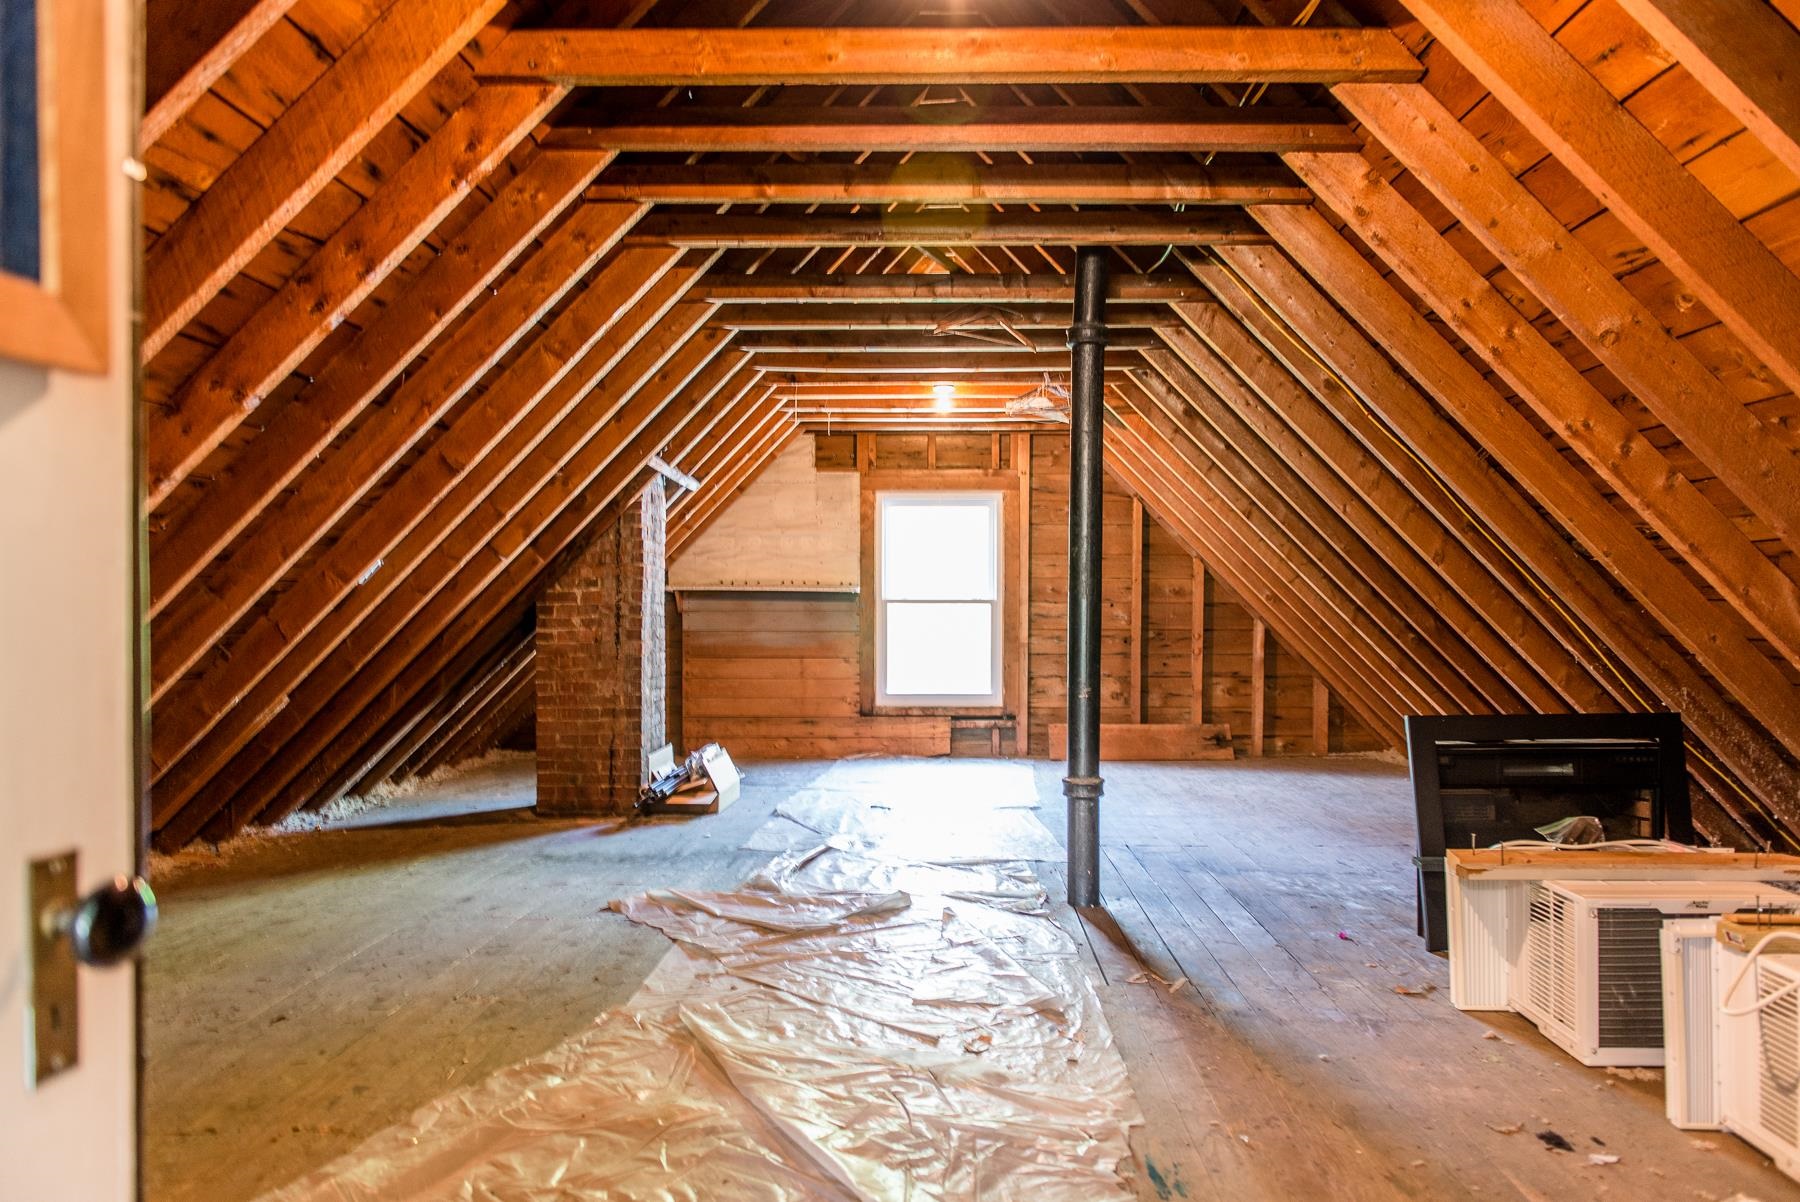 Unfinished Attic for more living space